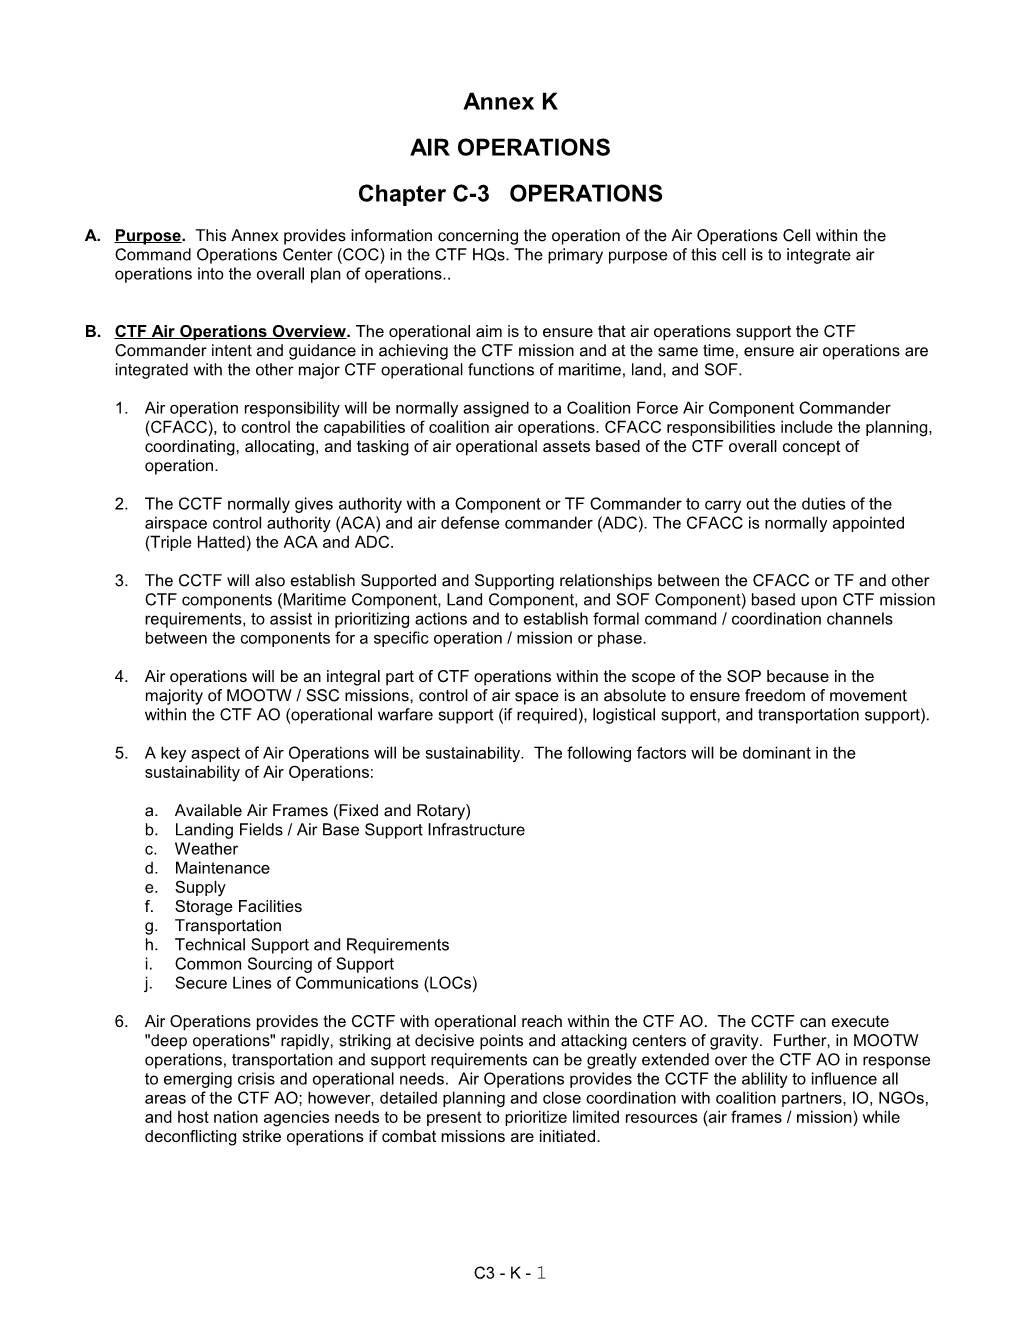 Chapter C-3 OPERATIONS